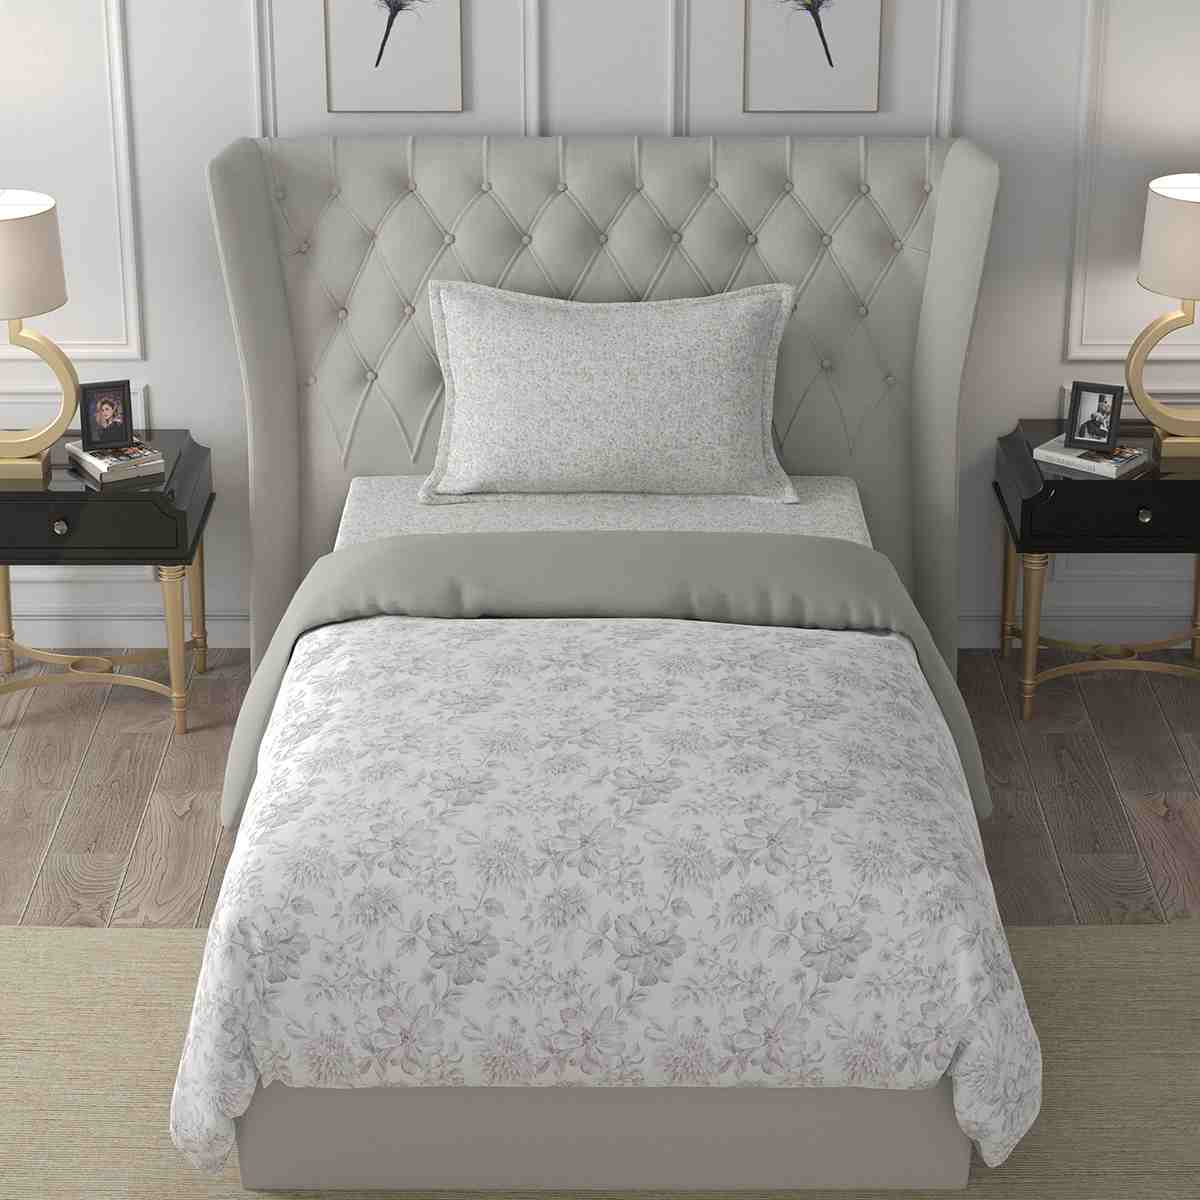 Regency Alicia Summer AC Quilt/Quilted Bed Cover/Comforter Neutral